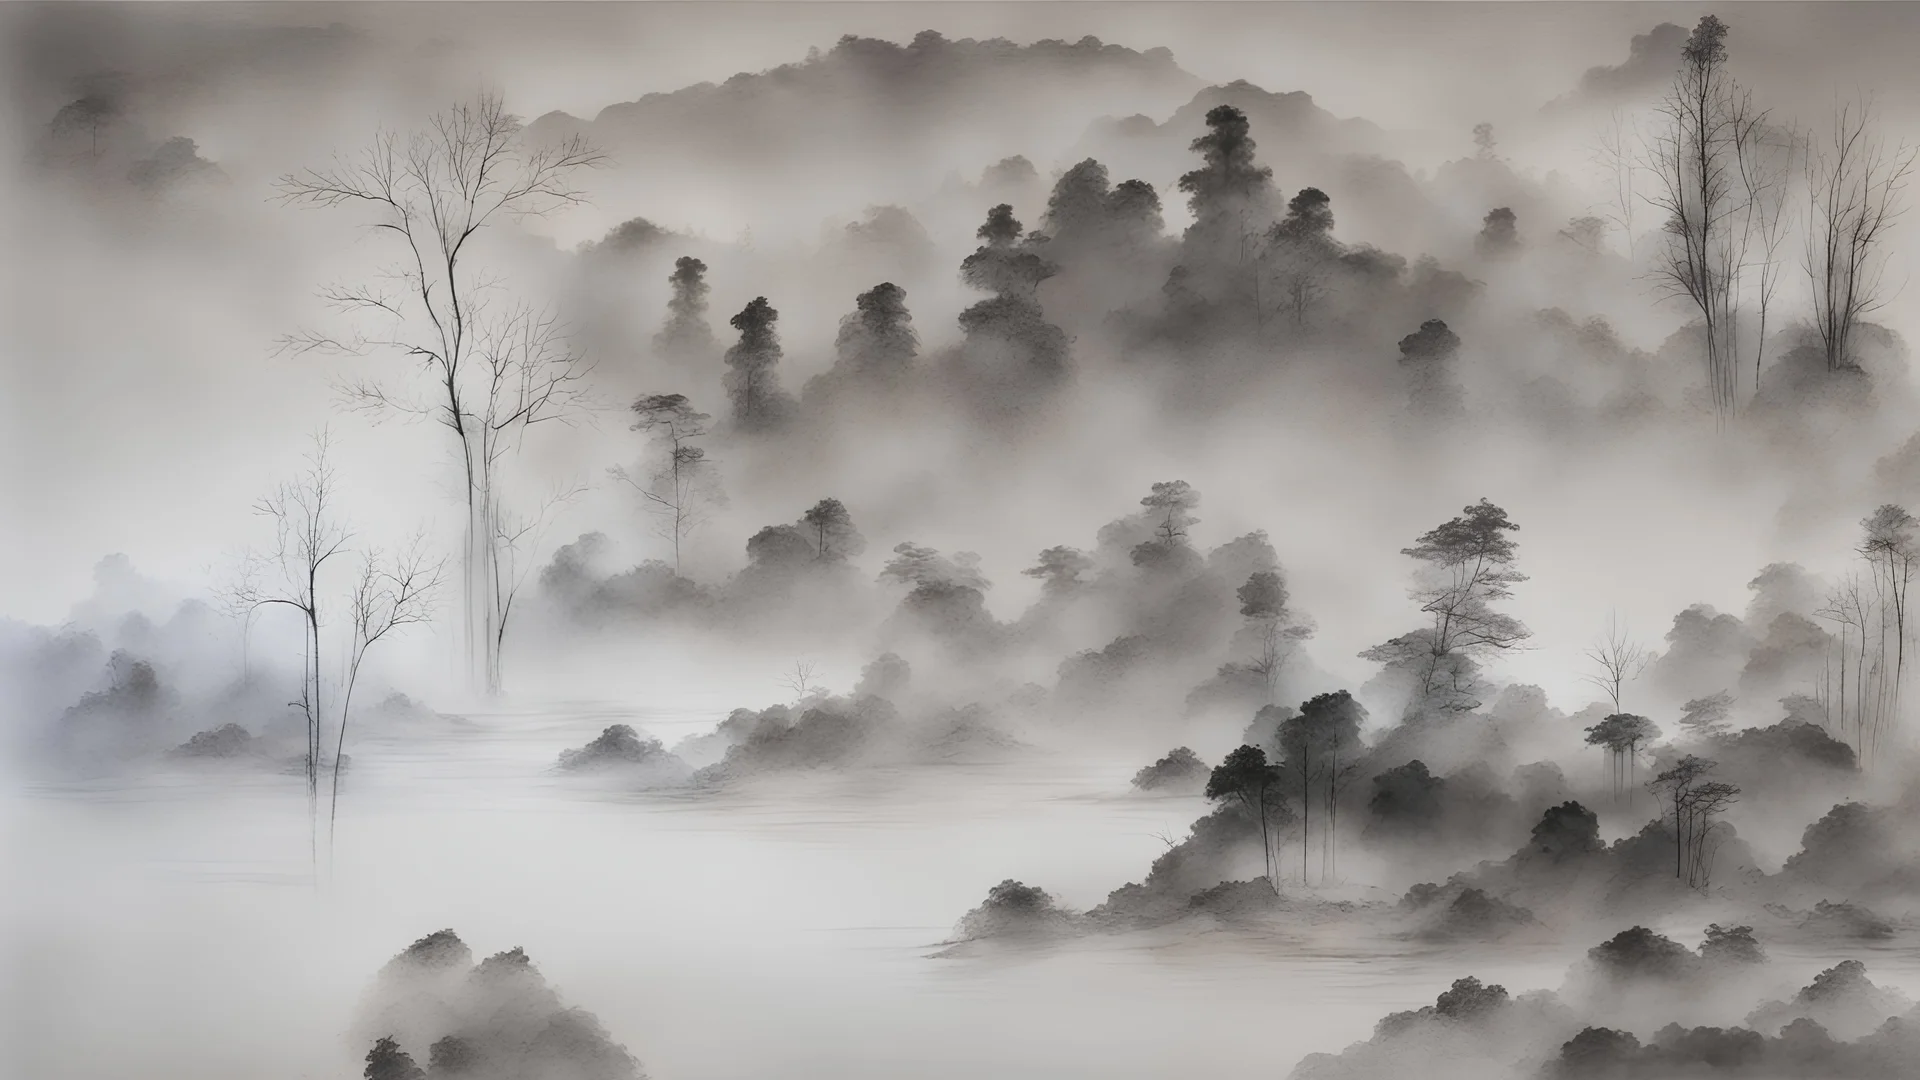 a black and white Chinese ink-painting of a nightly landscape in thick fog with pine trees in the background